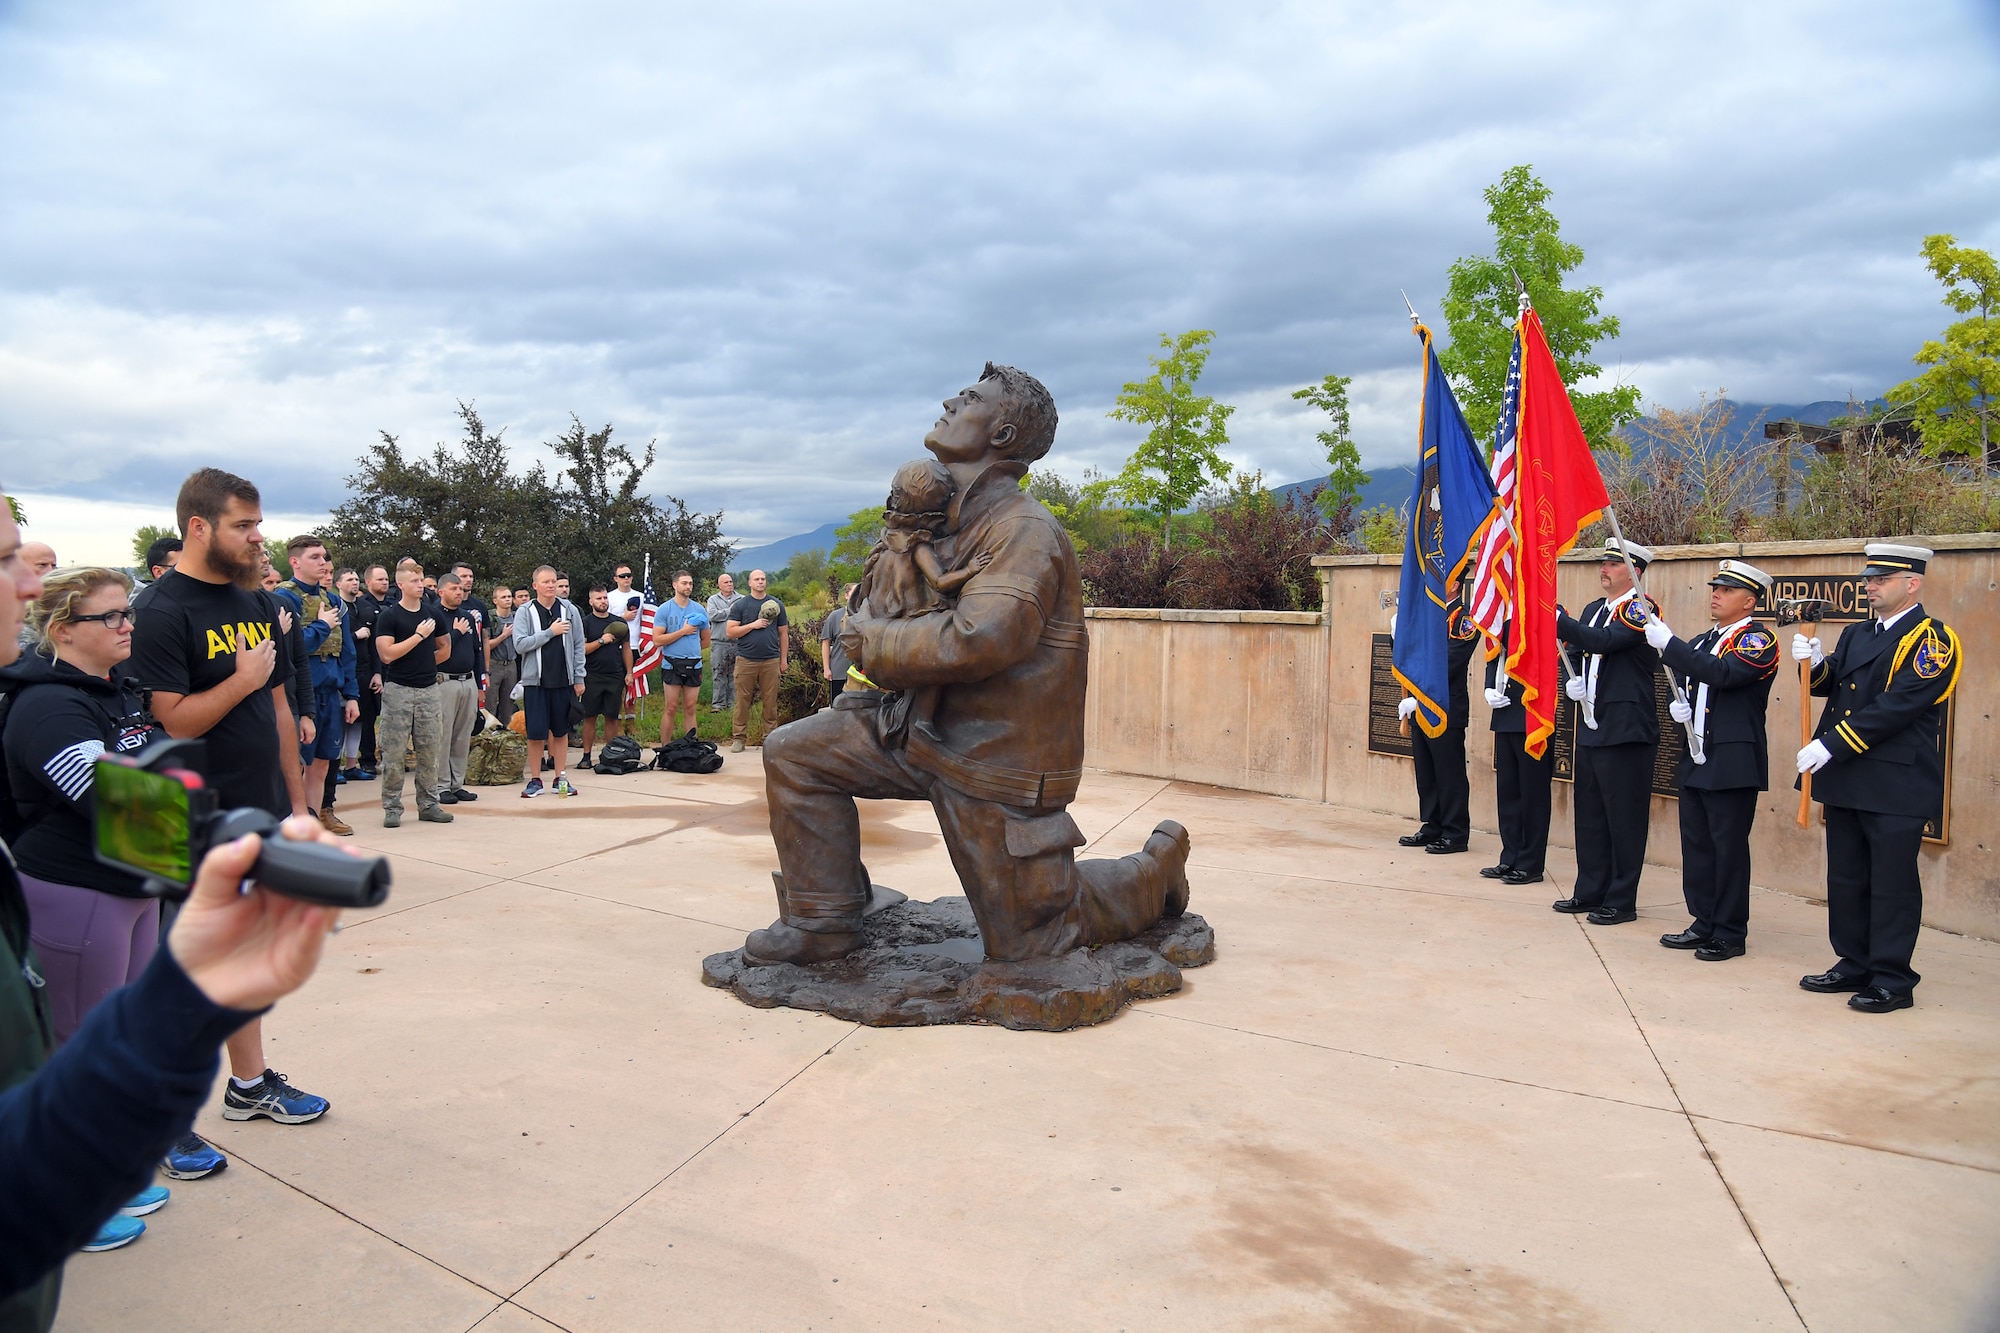 Participants salute the colors during the opening ceremony for the 9/11 Memorial Ruck March, at the Utah State University Botanical Gardens in Kaysville, Utah, Sept. 11, 2019. The event was co-sponsored by Hill Air Force Base first responders and fire and police departments from Kaysville and Layton, to honor and remember the fallen from the events of Sept. 11, 2001. (U.S. Air Force photo by Todd Cromar)